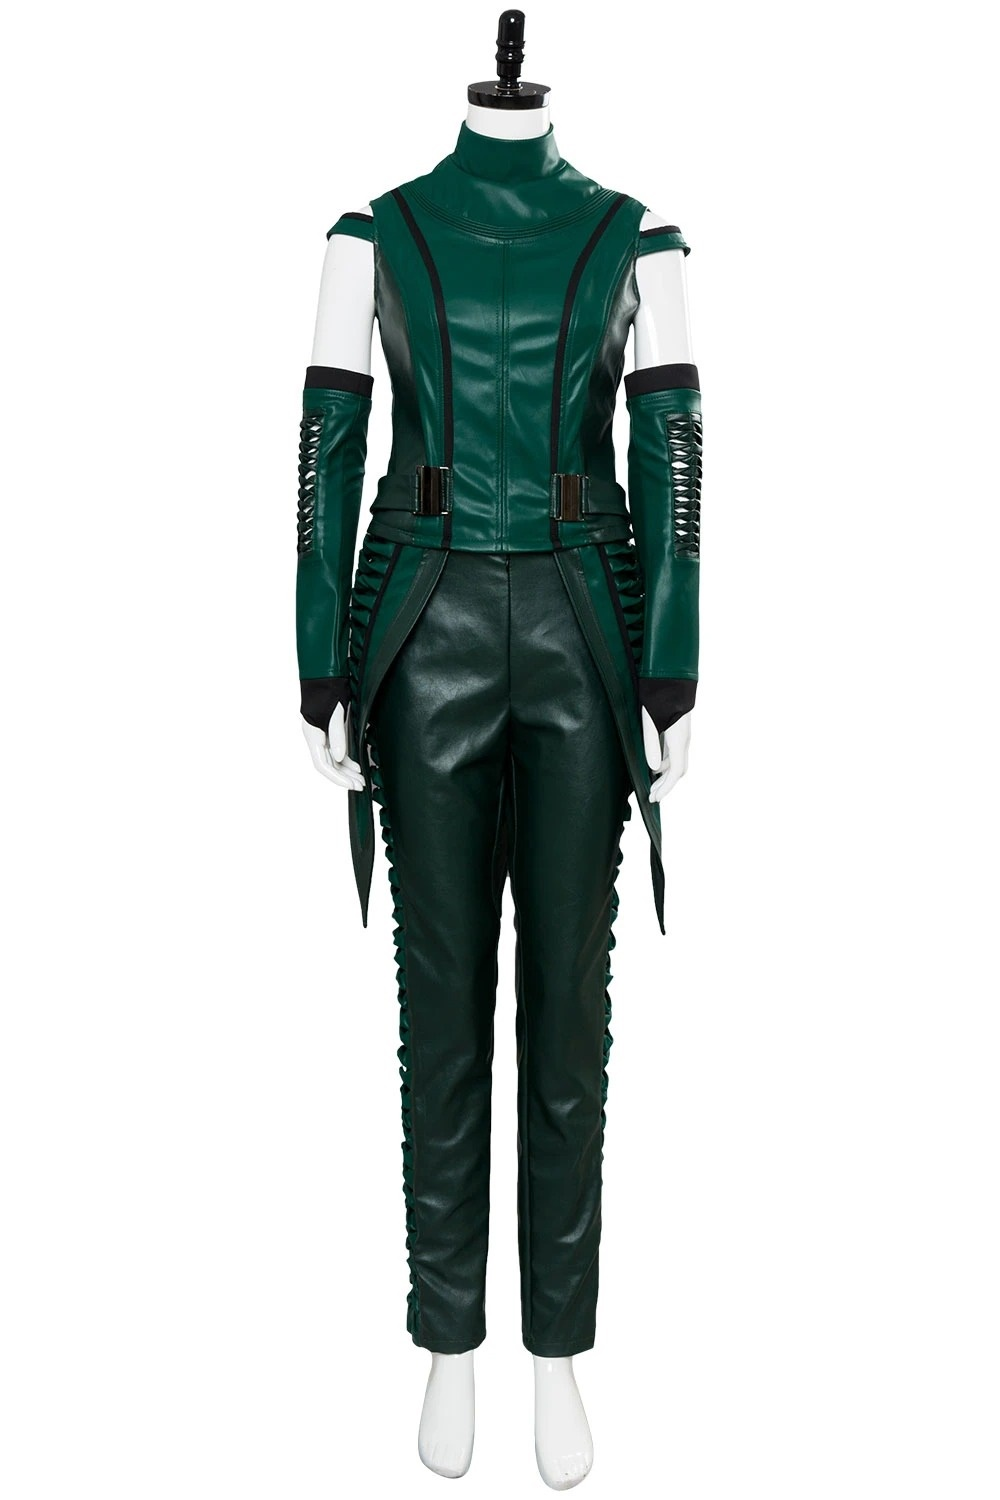 Guardians Of The Galaxy 2 Mantis Outfit Cosplay Costume